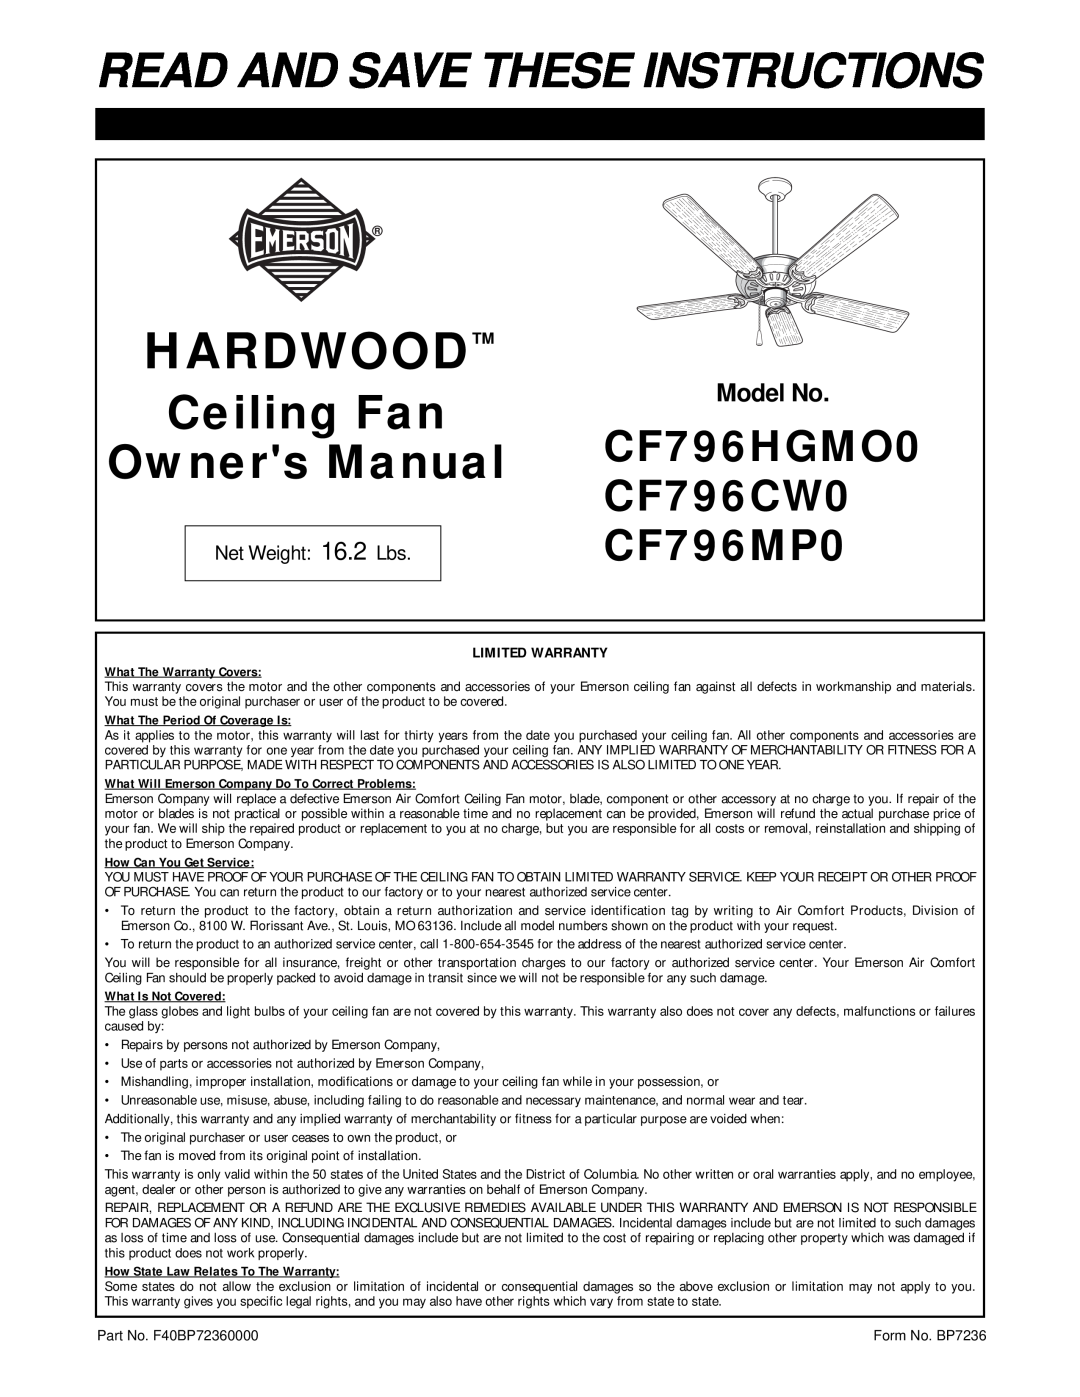 Emerson CF796HGMO0 warranty Model No, Hardwood, Read And Save These Instructions, Ceiling Fan, CF796CW0, CF796MP0 